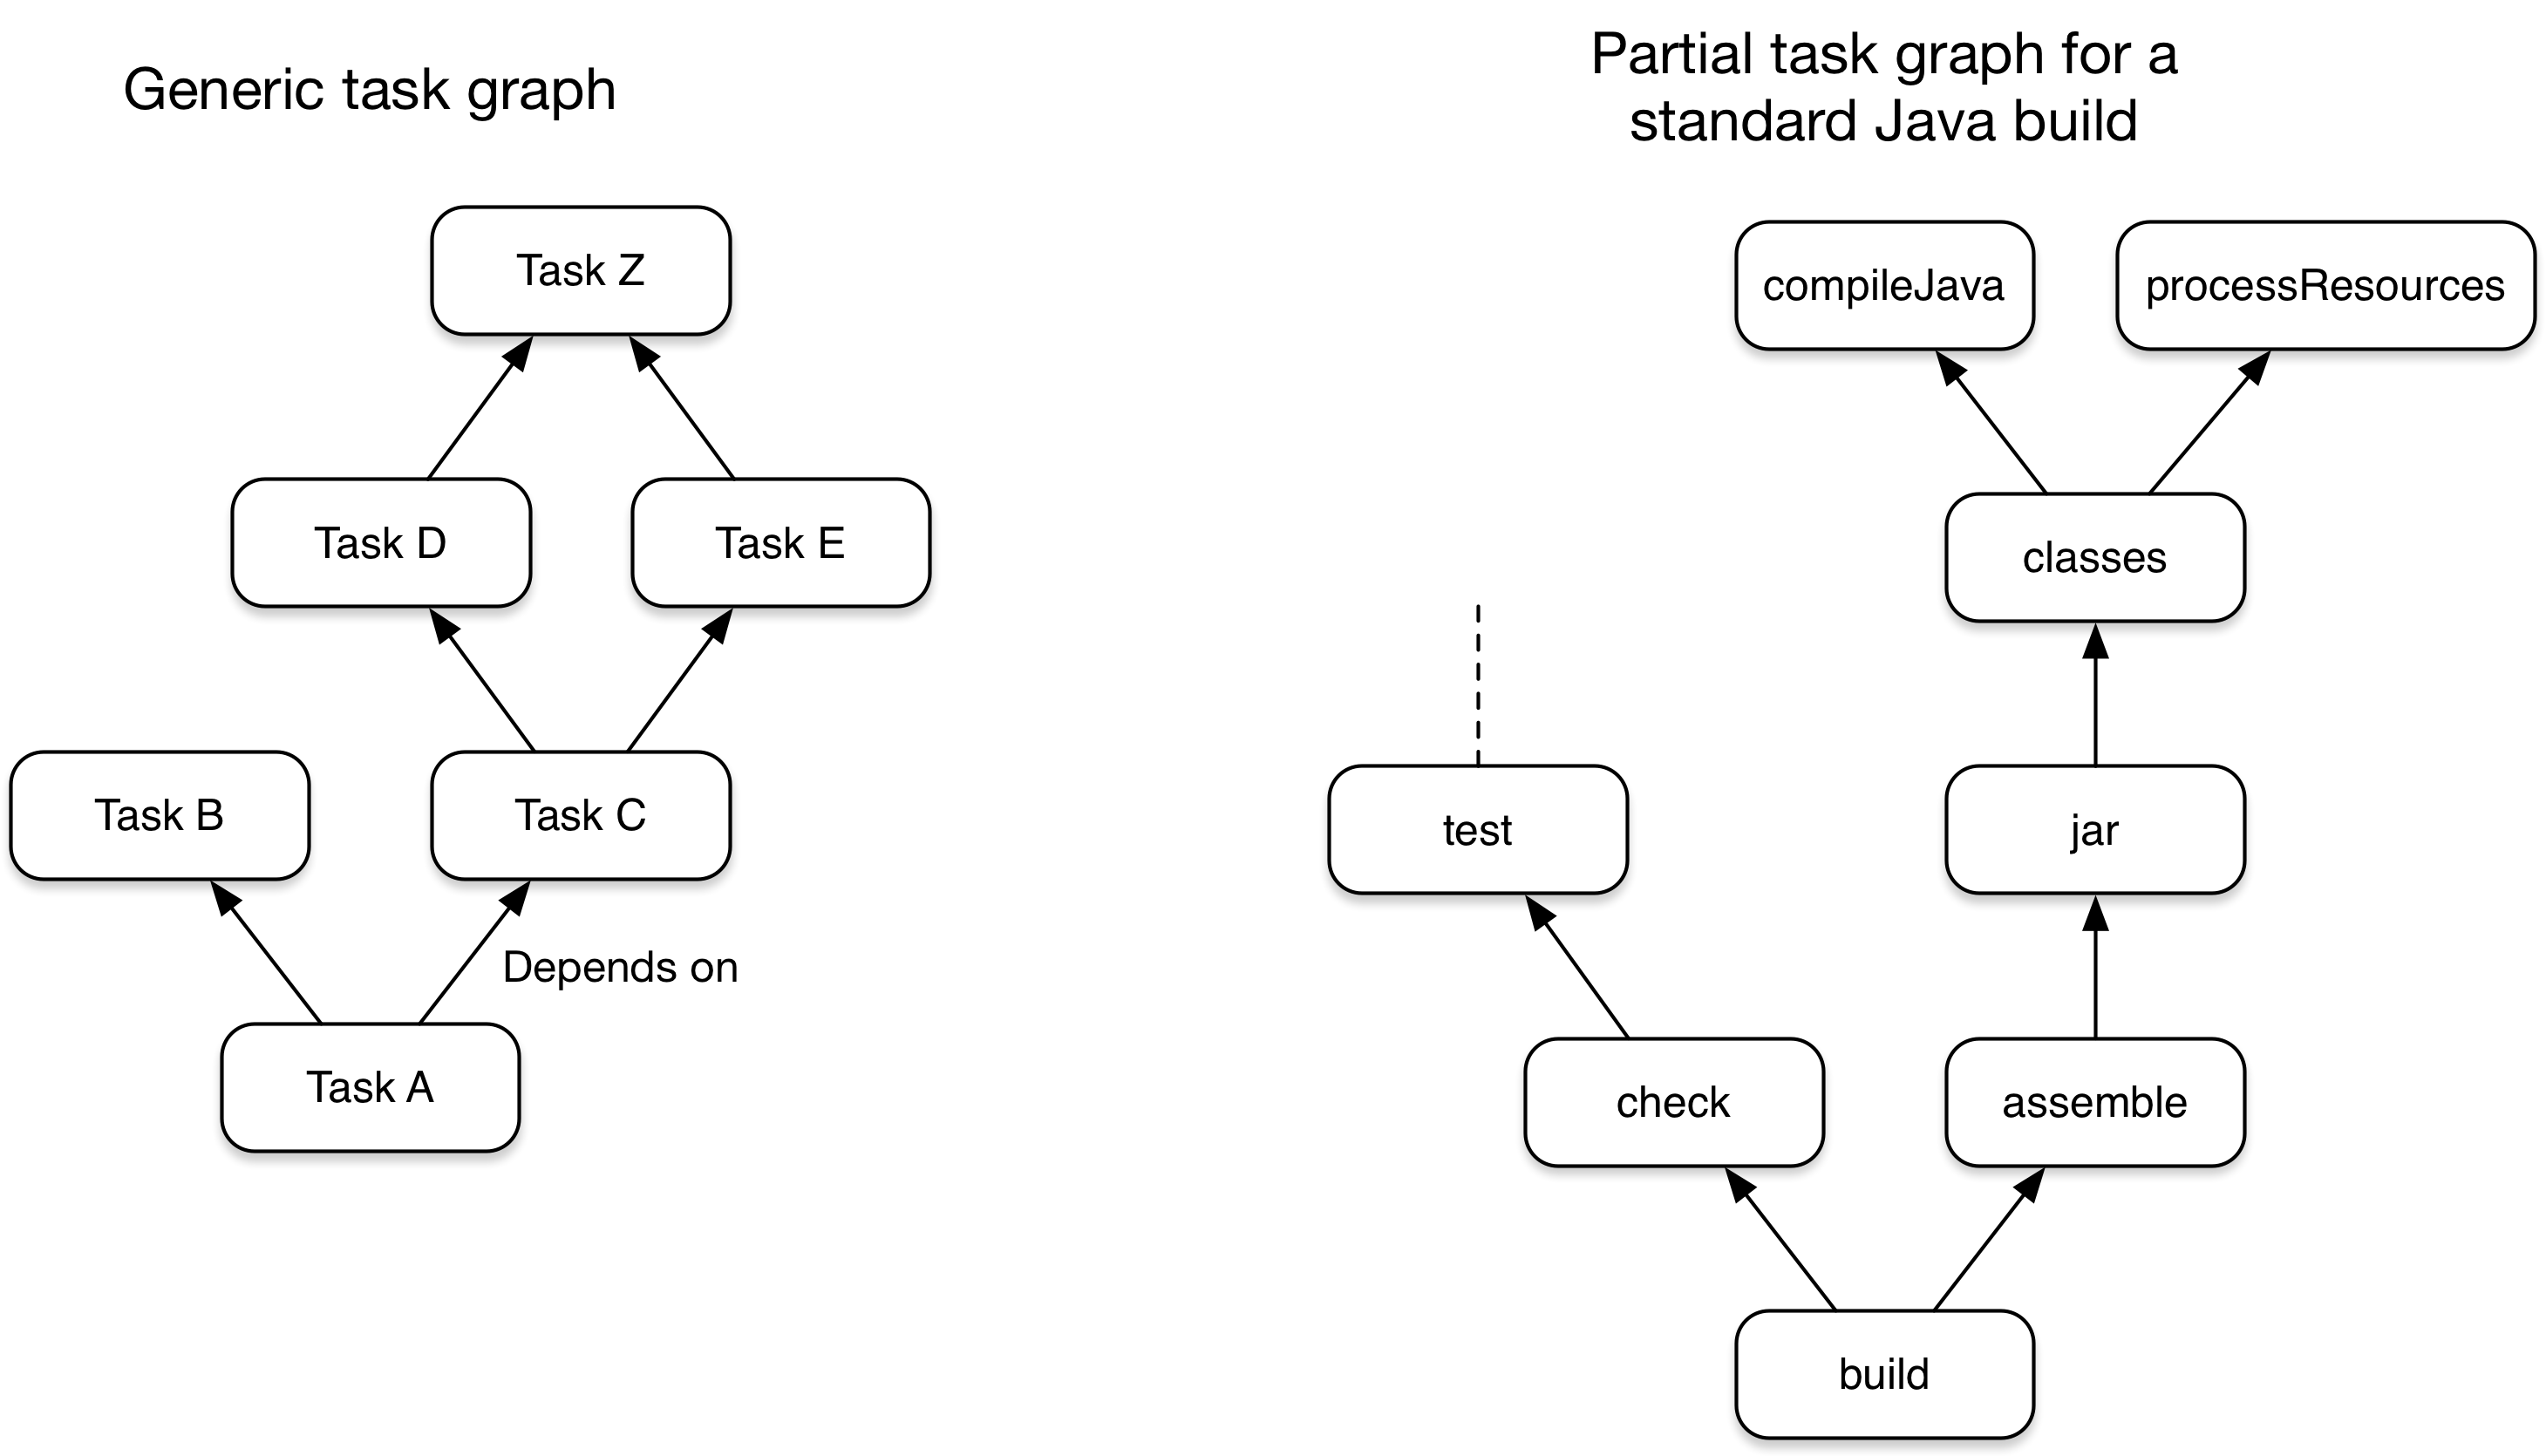 Example task graphs